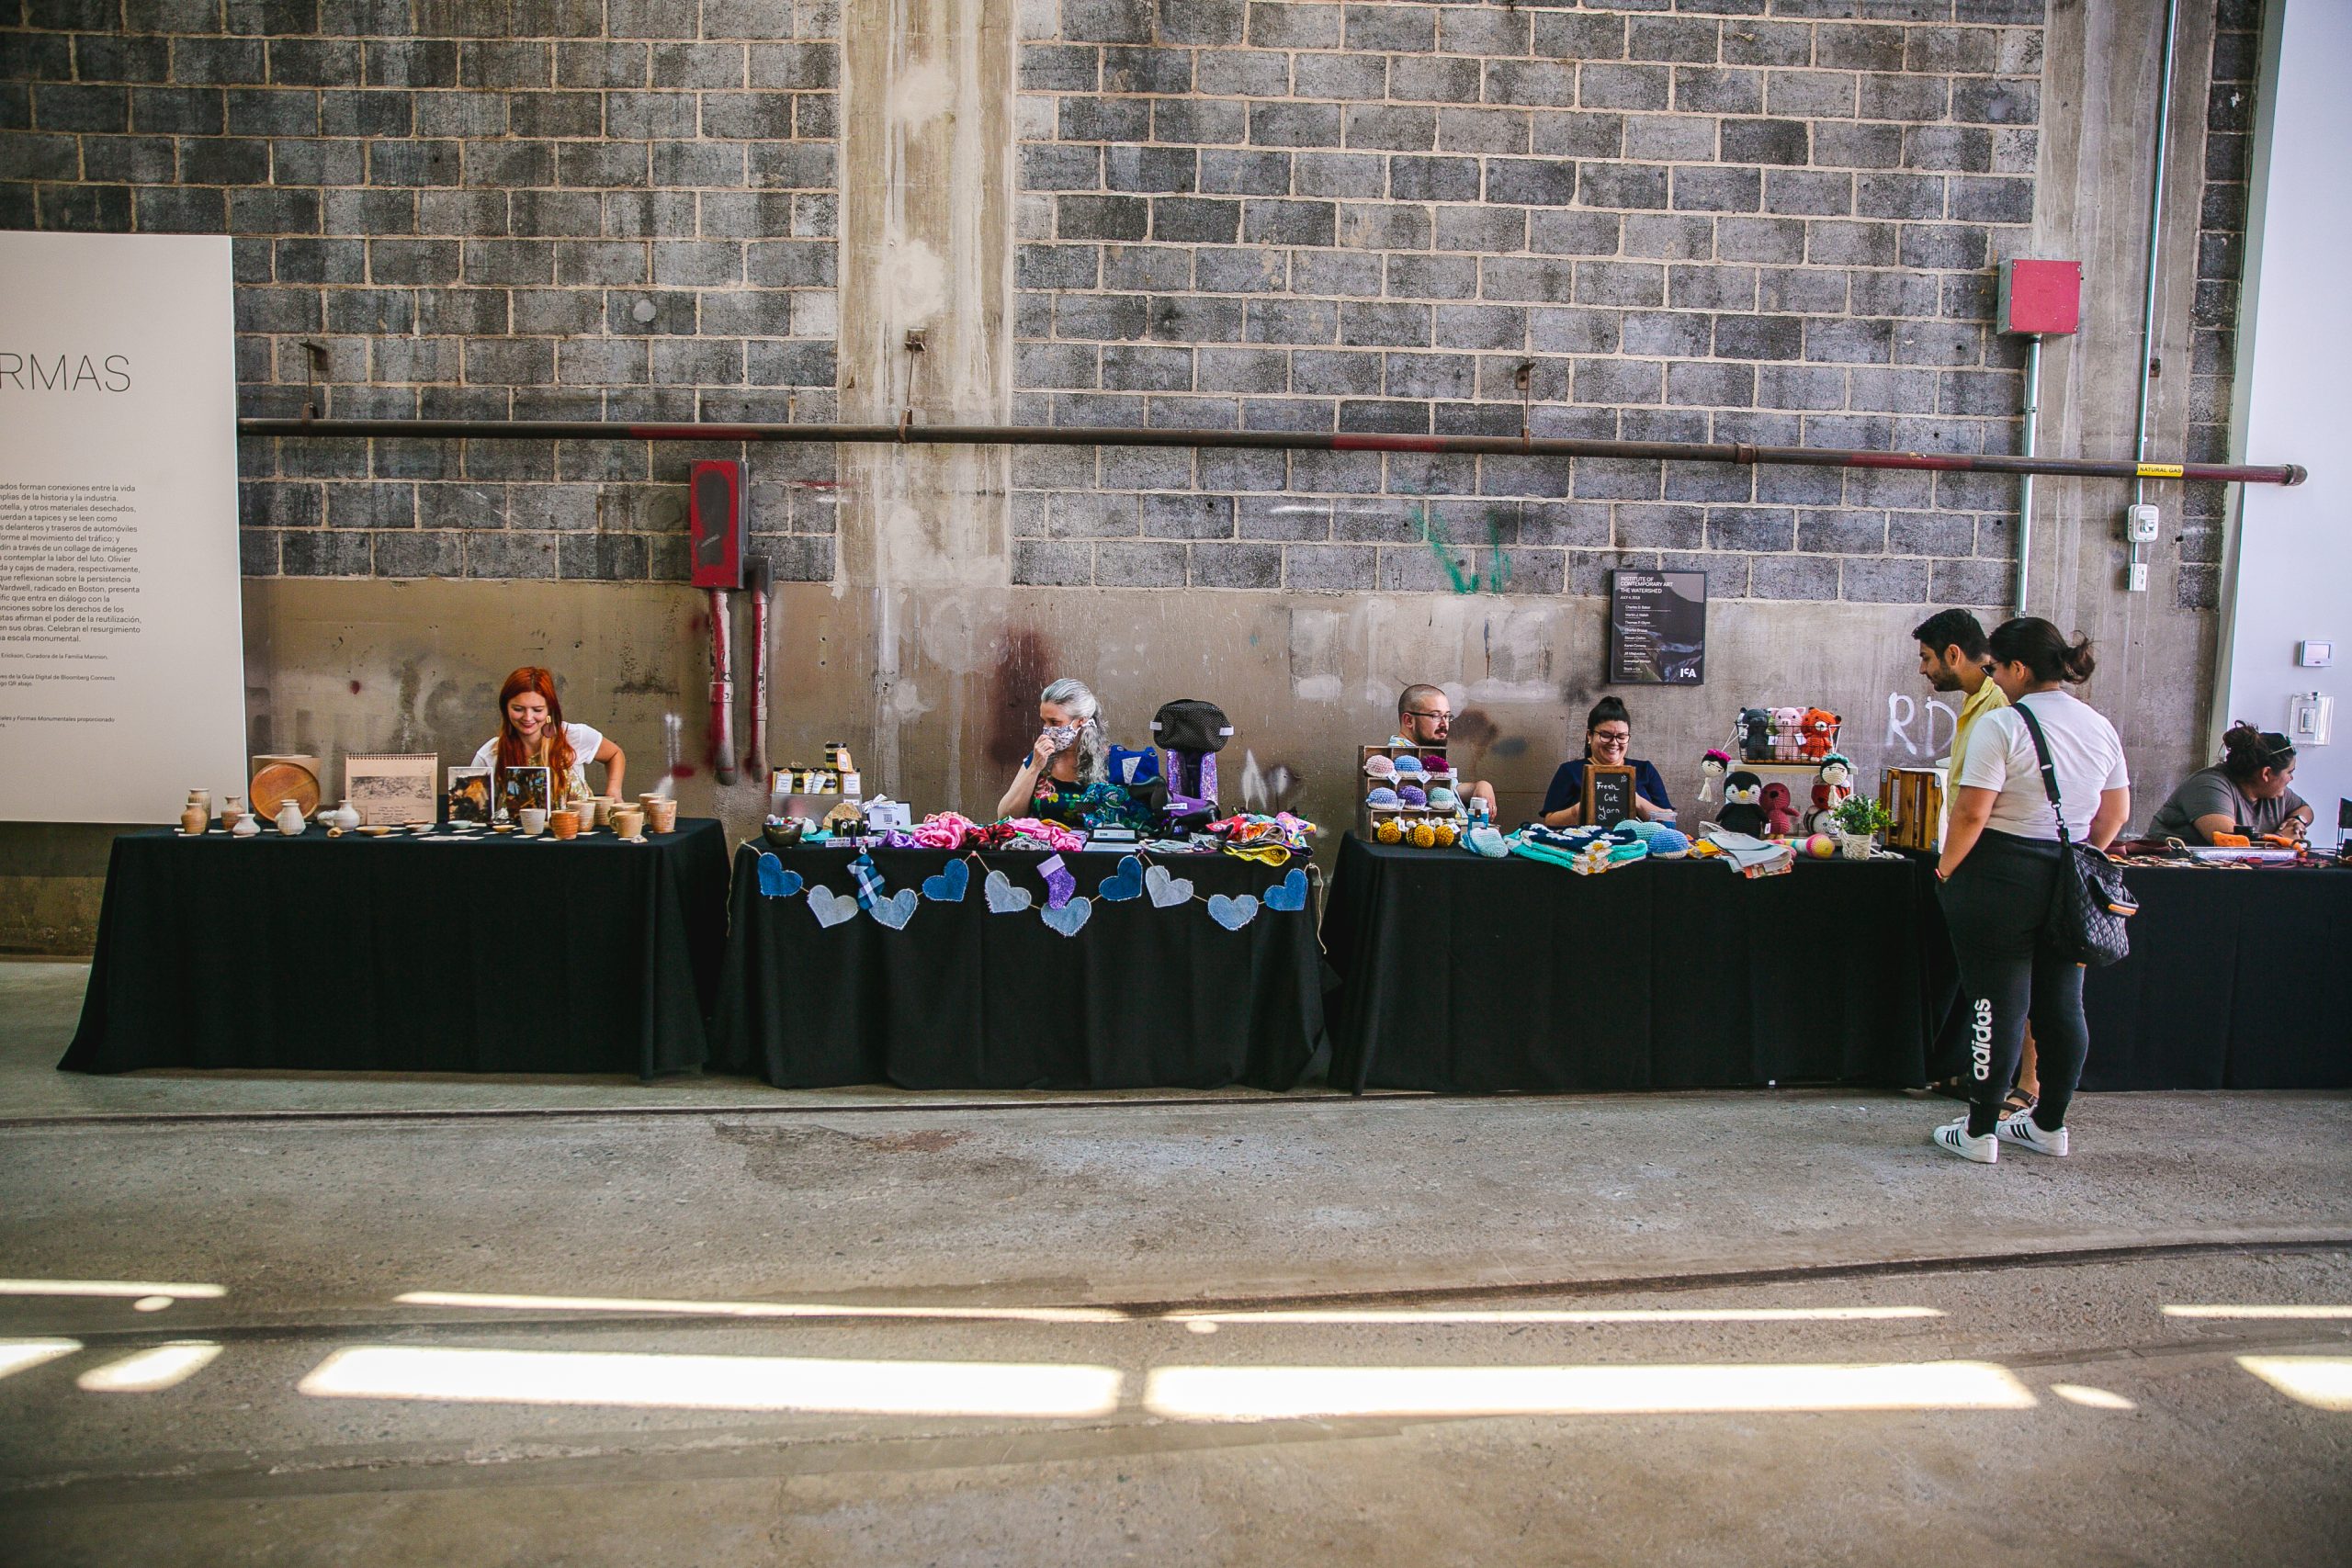 A row of vendors inside an industrial-looking space